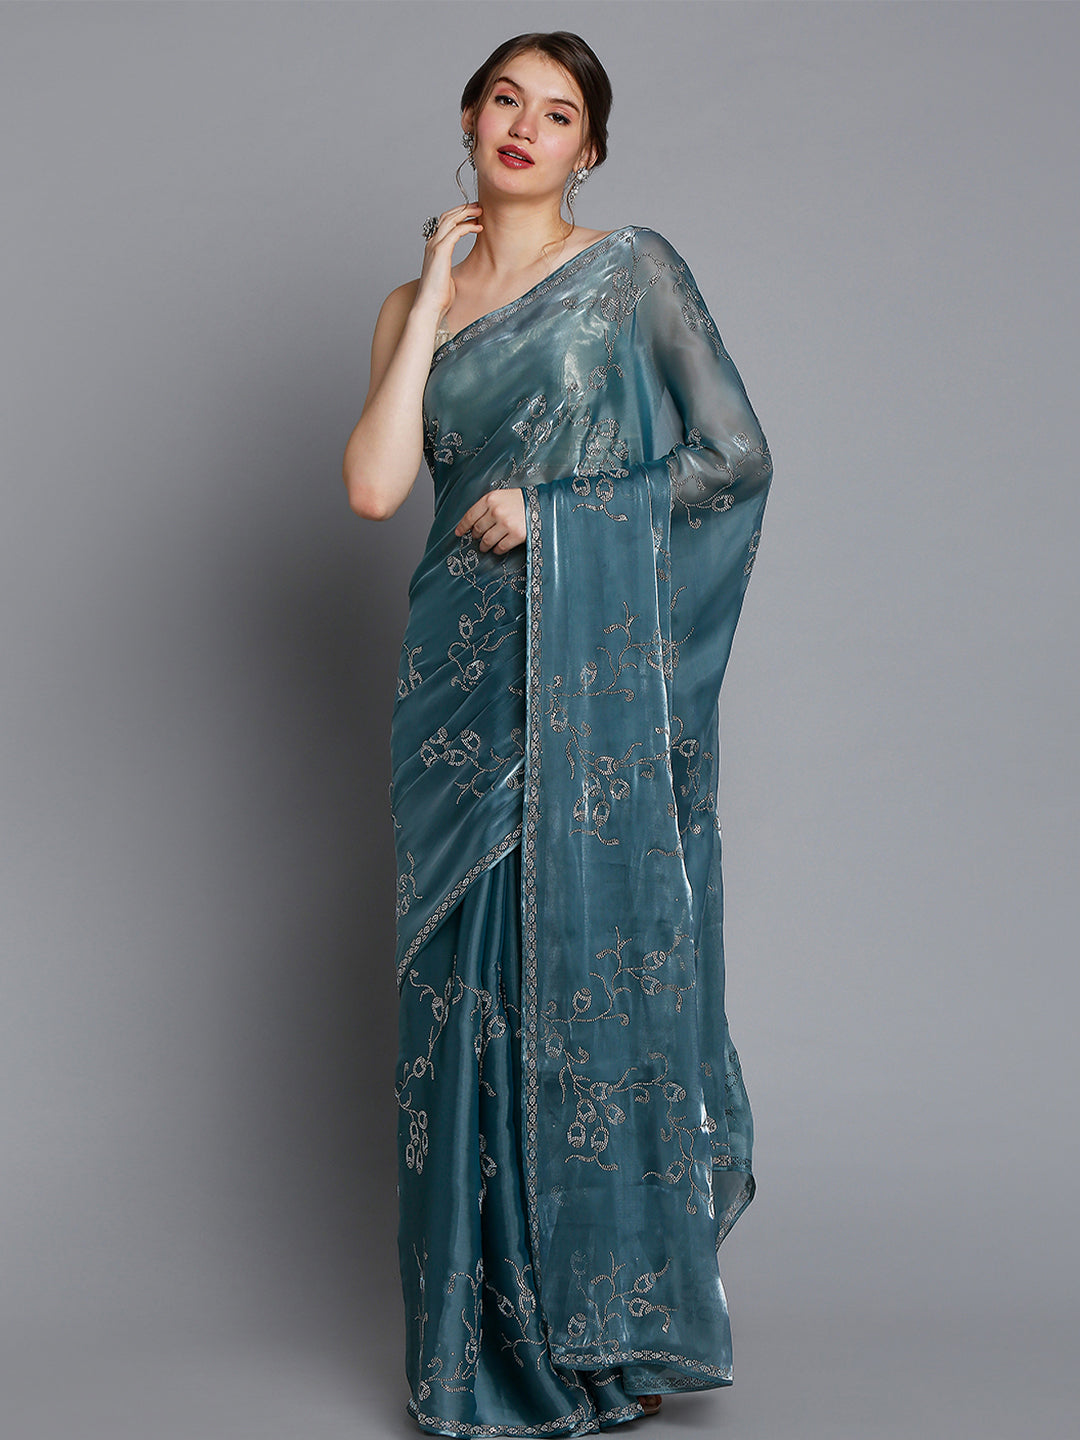 Greyish Blue Tissue Saree With Floral Embroidery